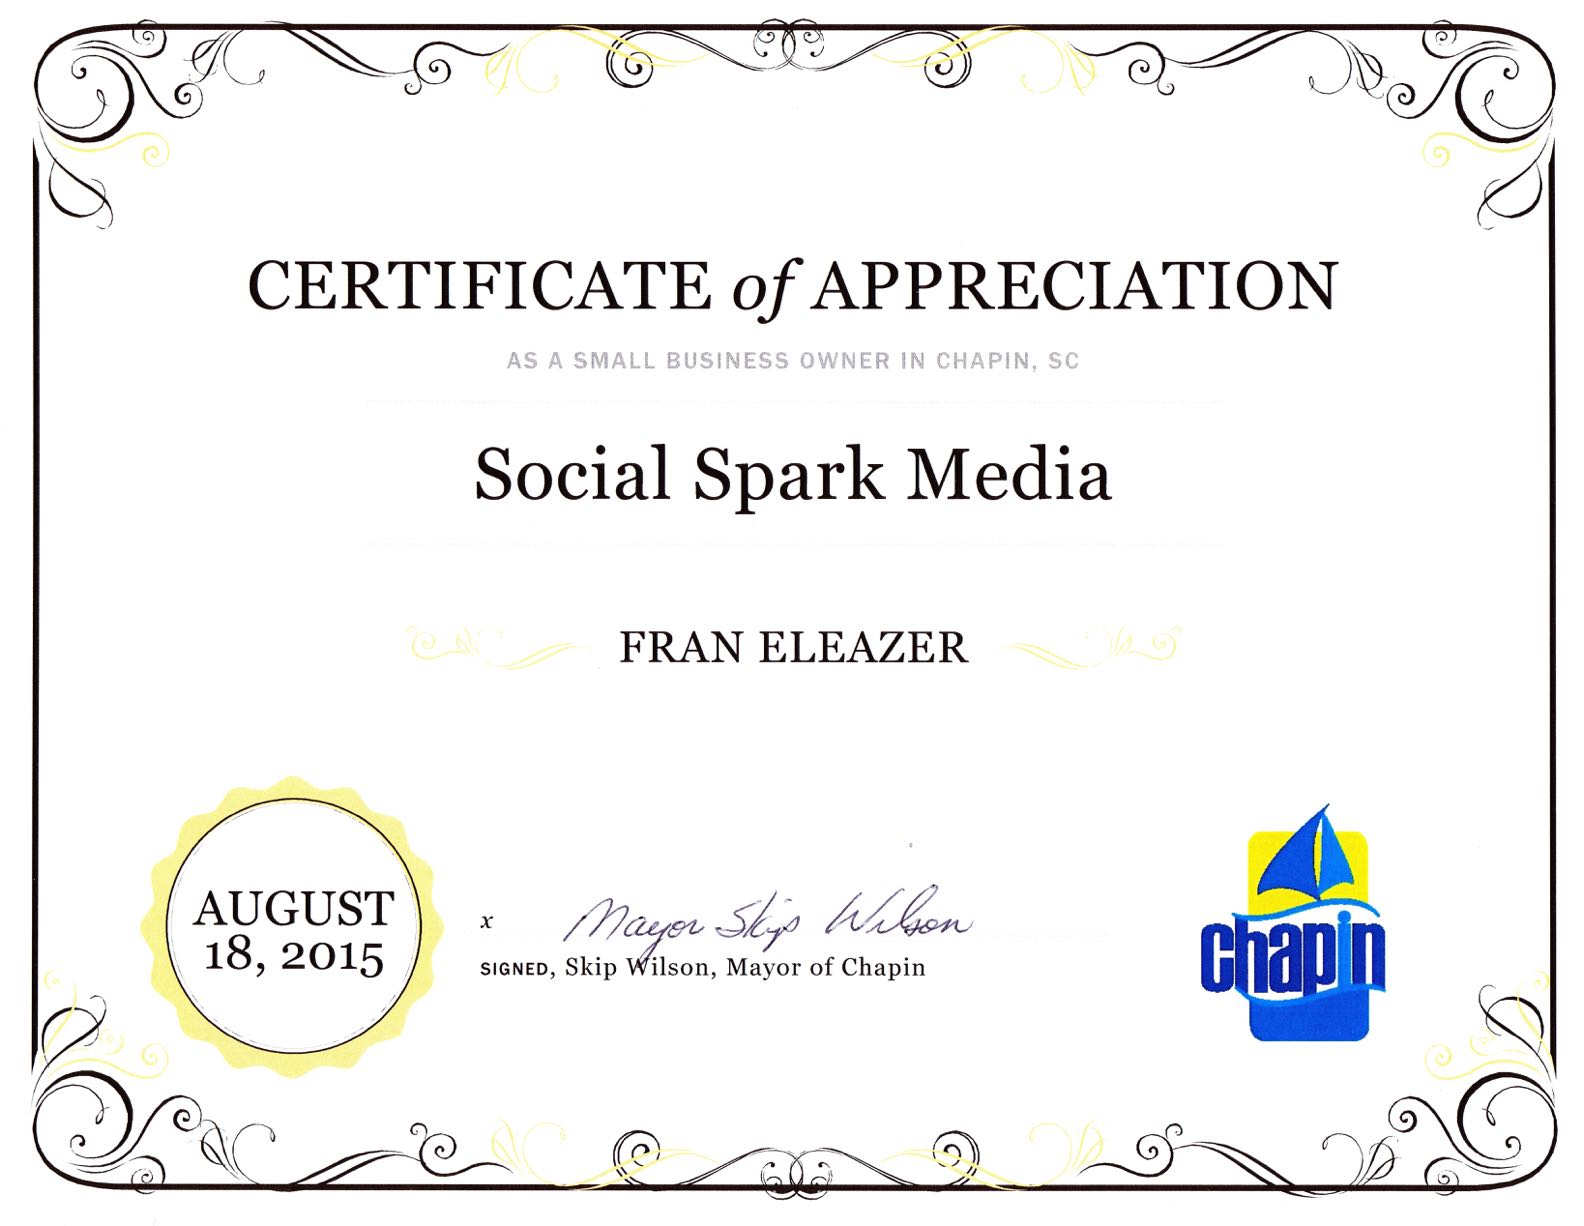 Social Spark Media receives Certificate of Appreciation from Town of Chapin